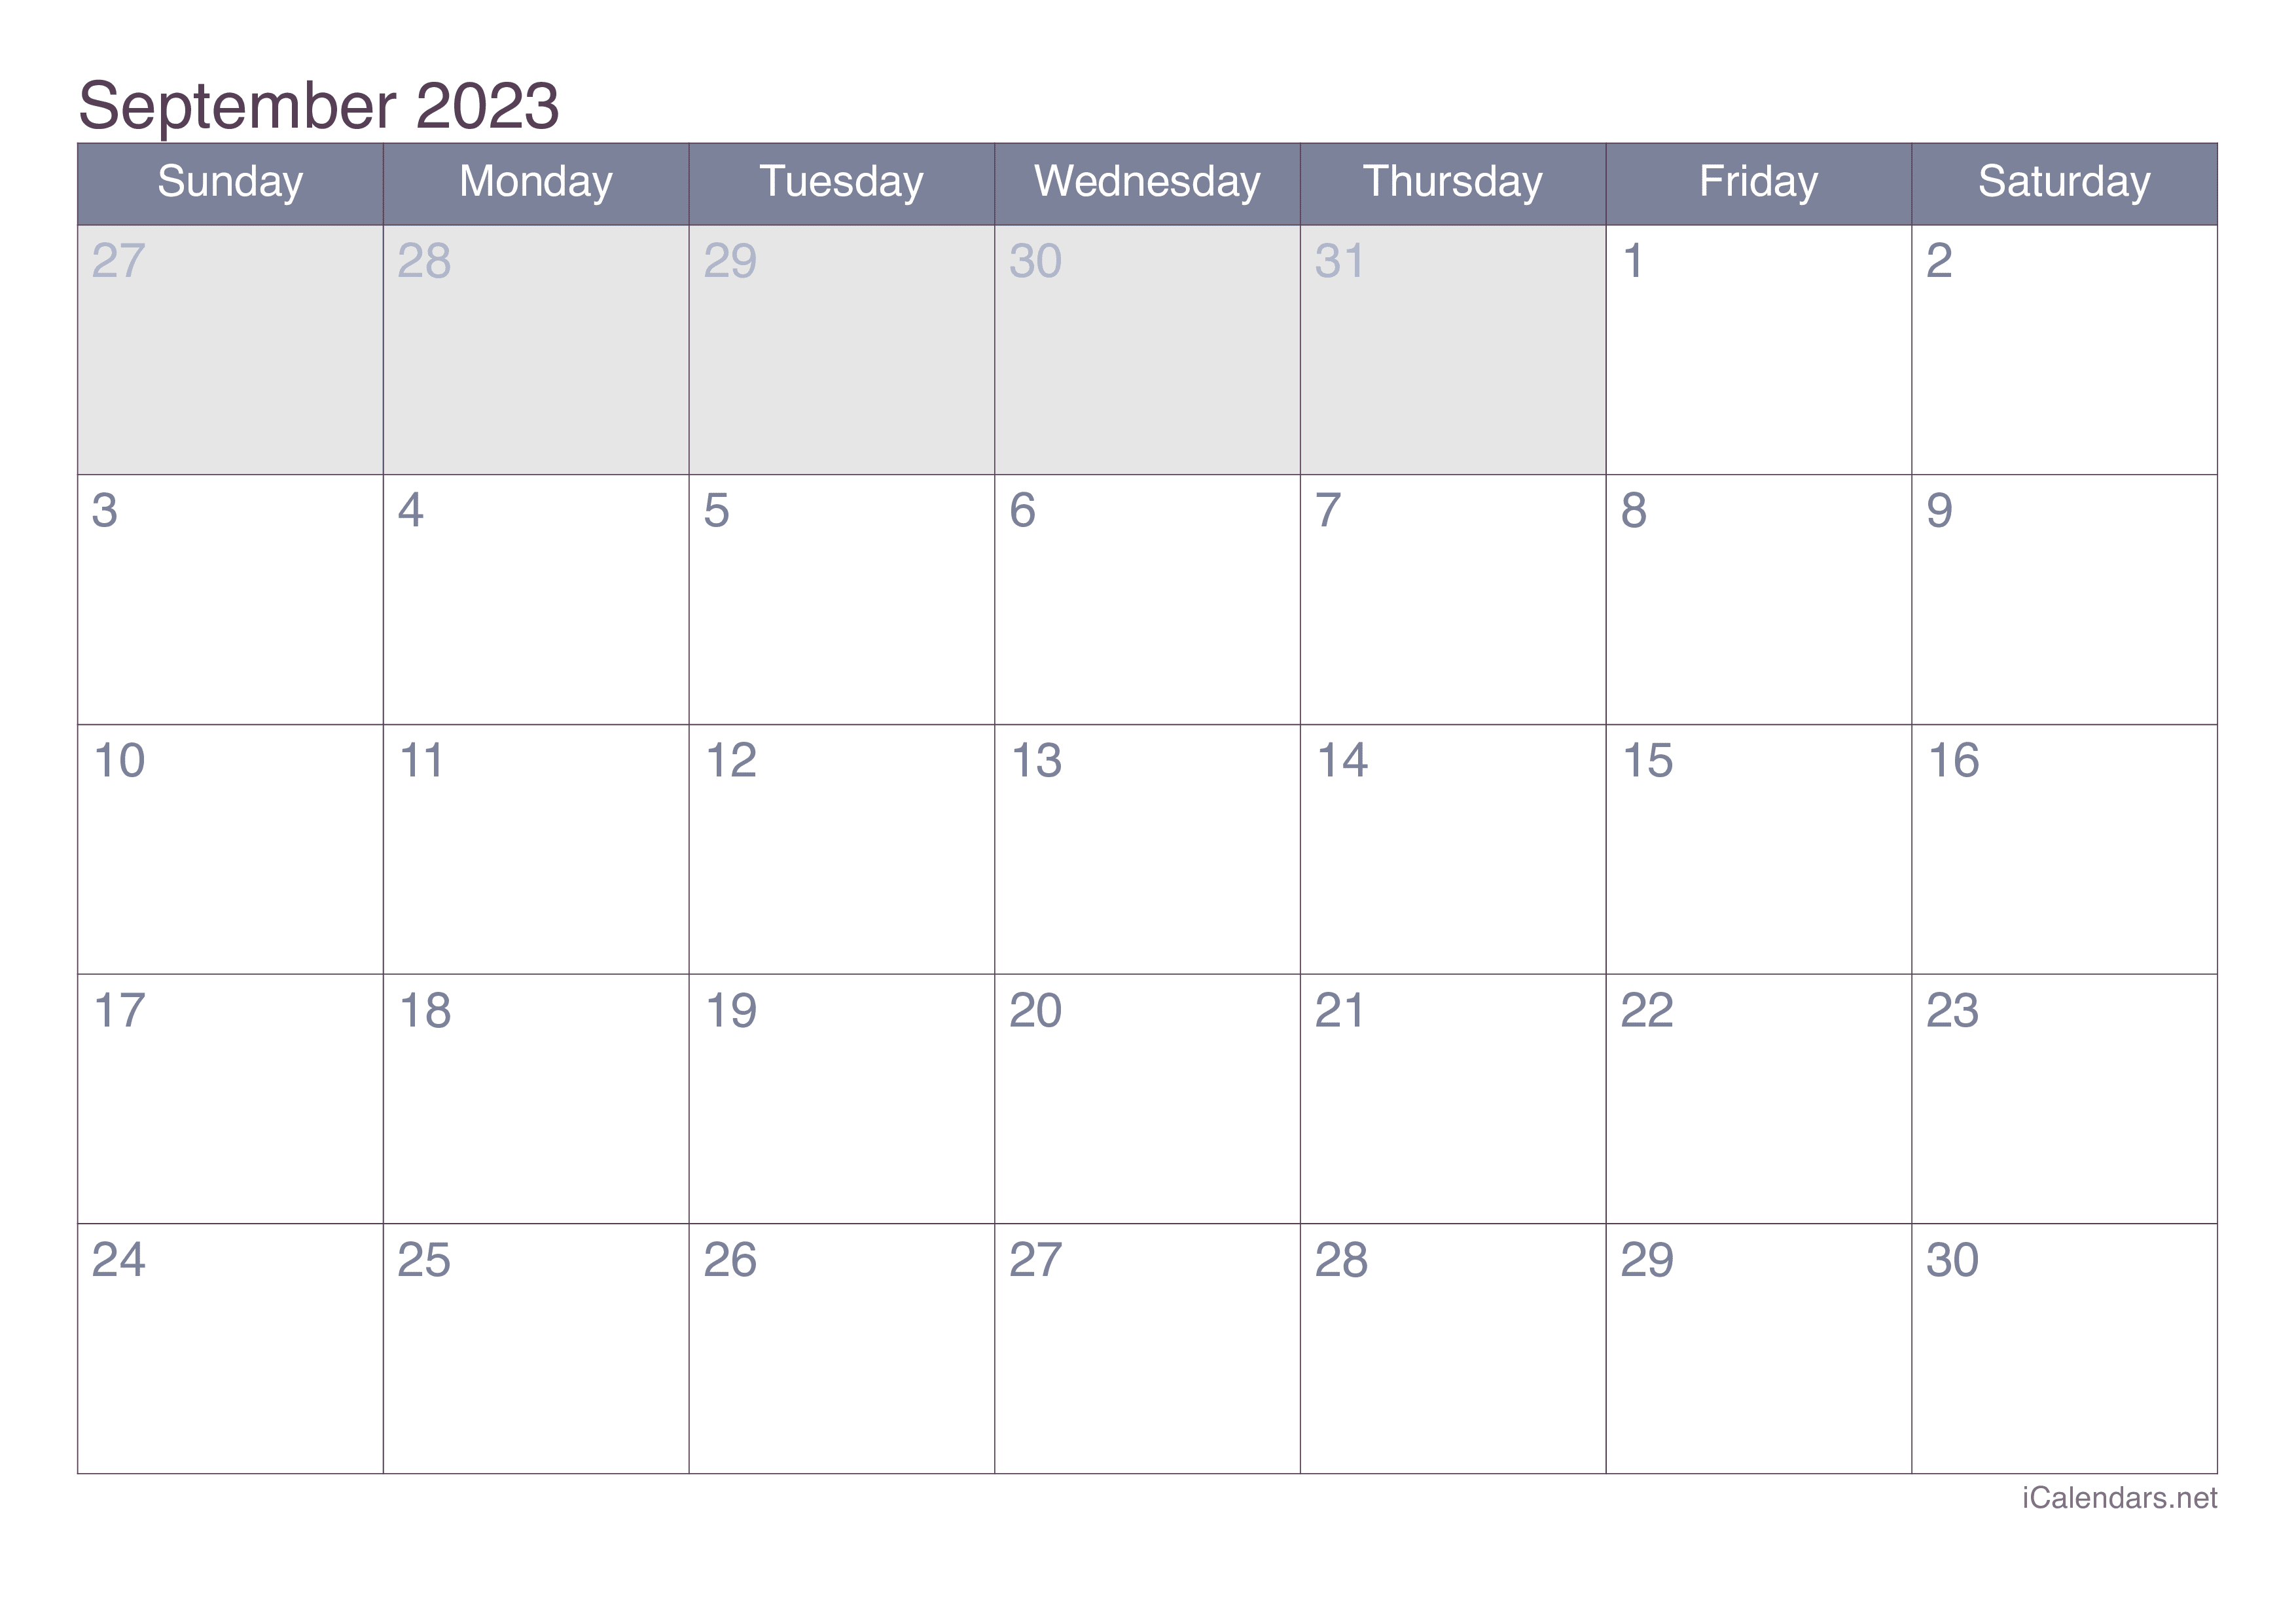 september-2023-calendar-templates-for-word-excel-and-pdf